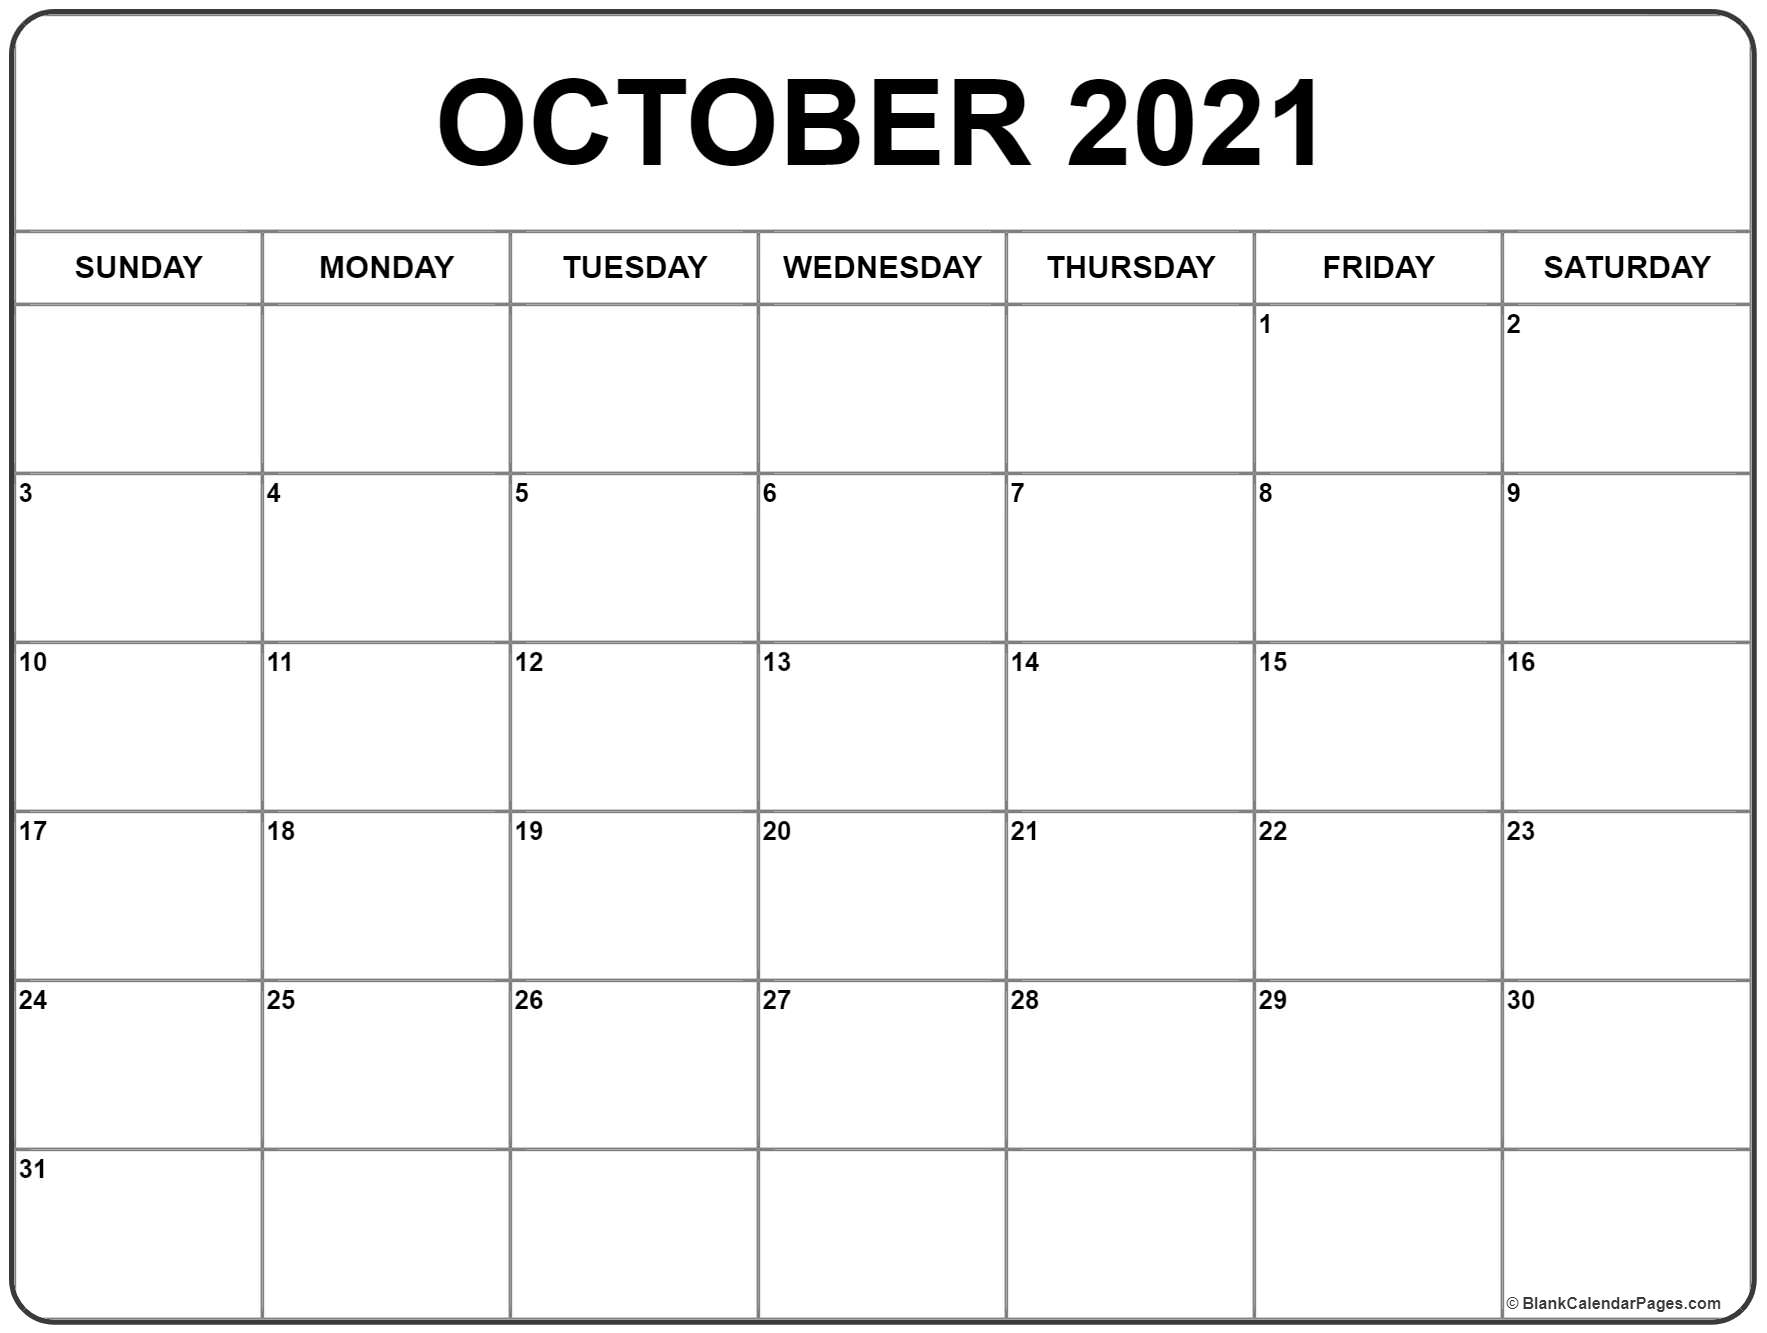 Get October 2021 Calendar To Color And Print